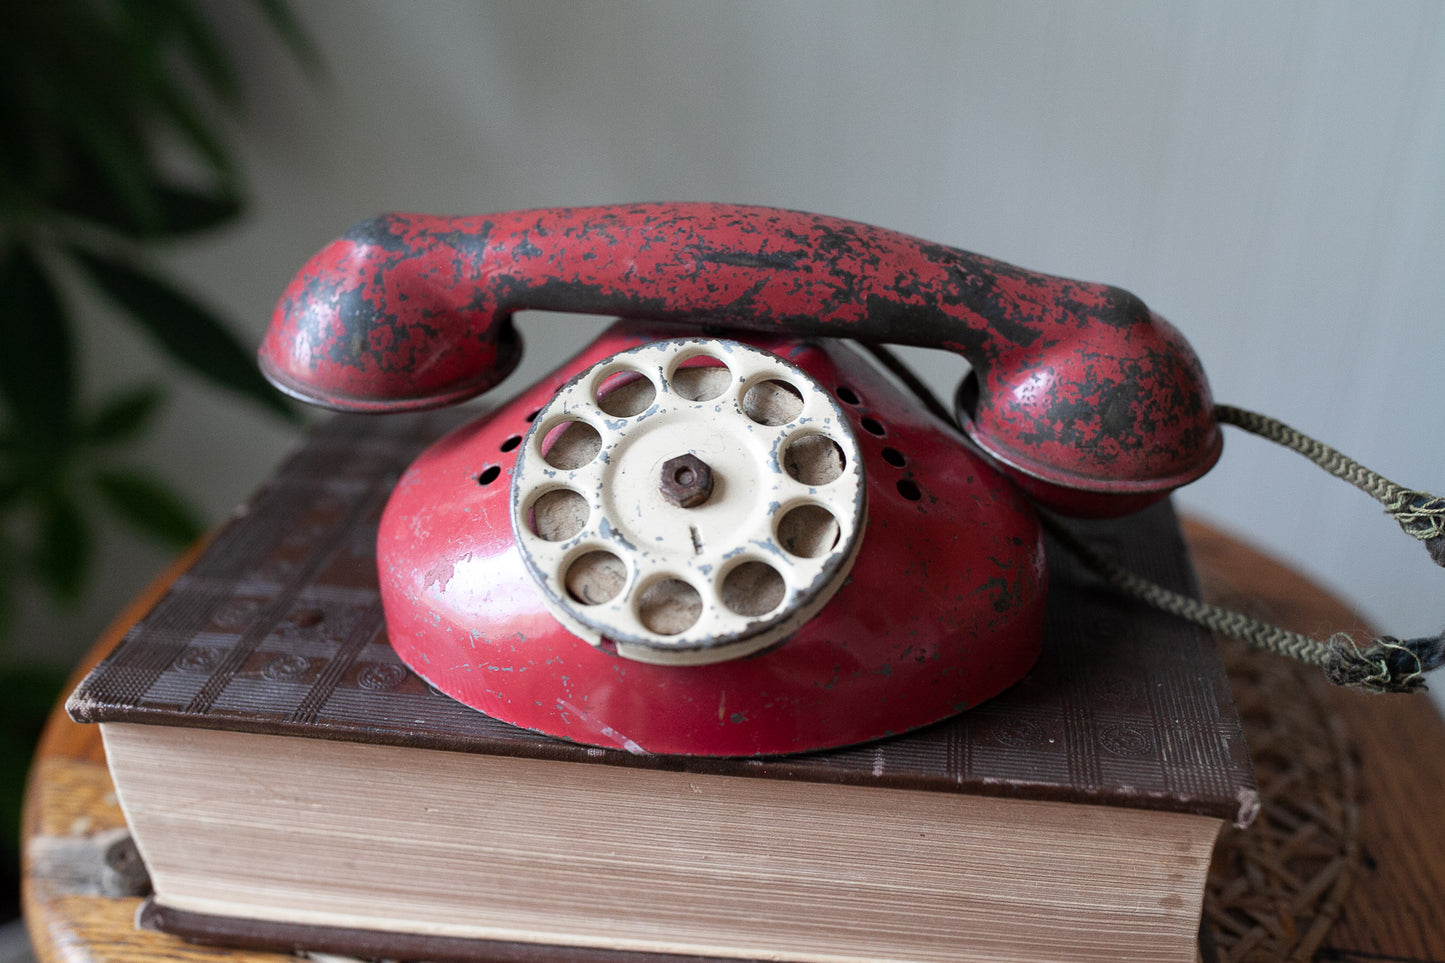 Vintage Telephone - Red Phone -Red Rotary Phone